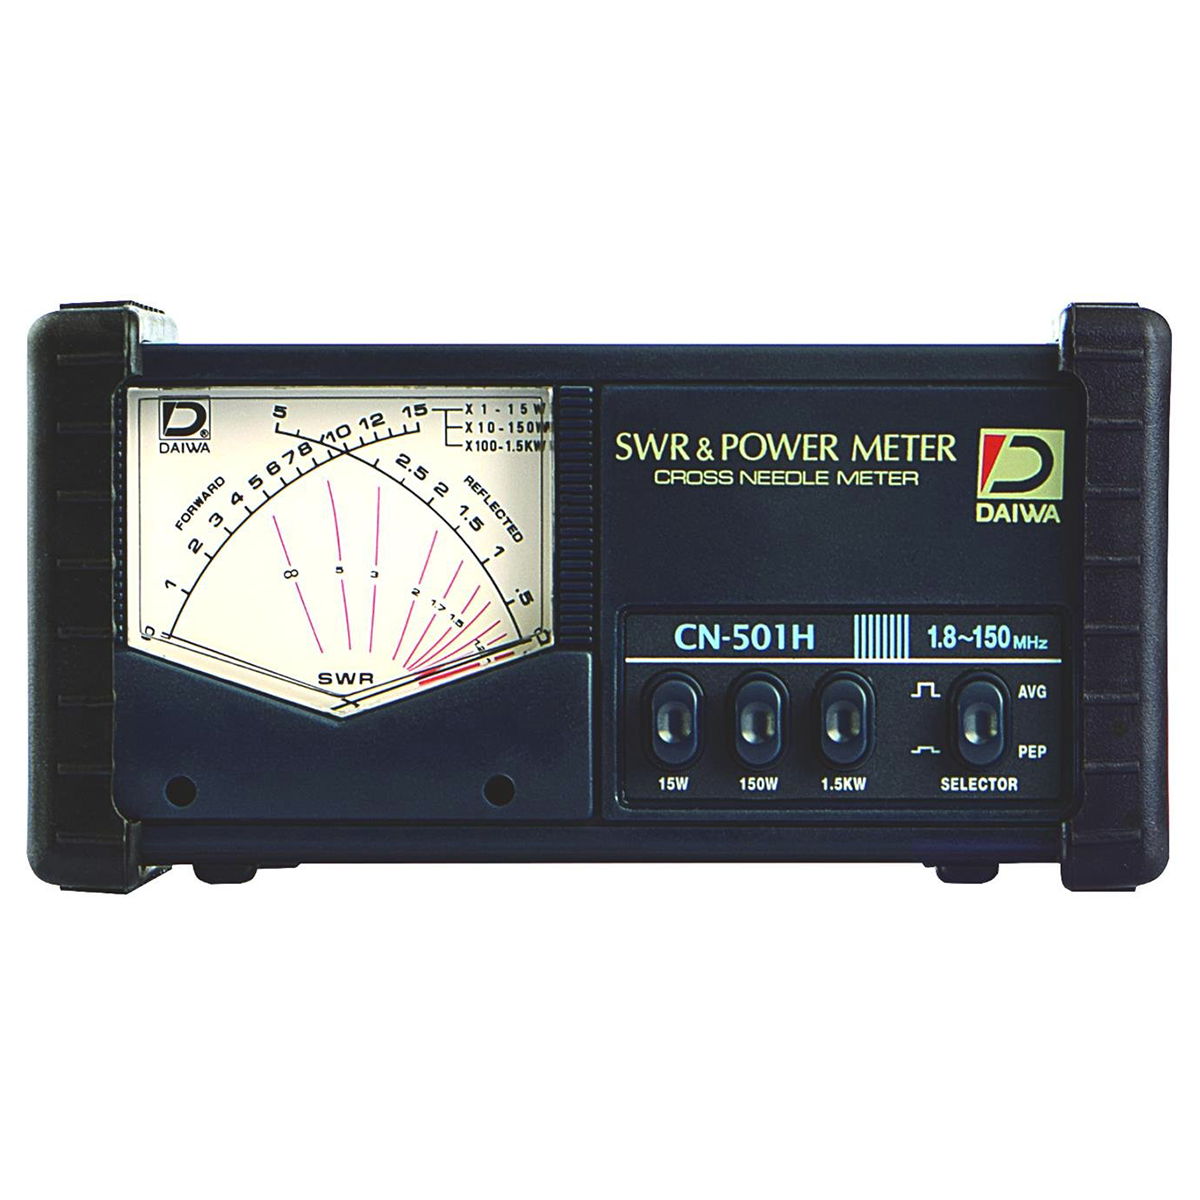 Daiwa CN-501H SWR & Power Meter 1.8-150 MHz up to 1500 Watts | The